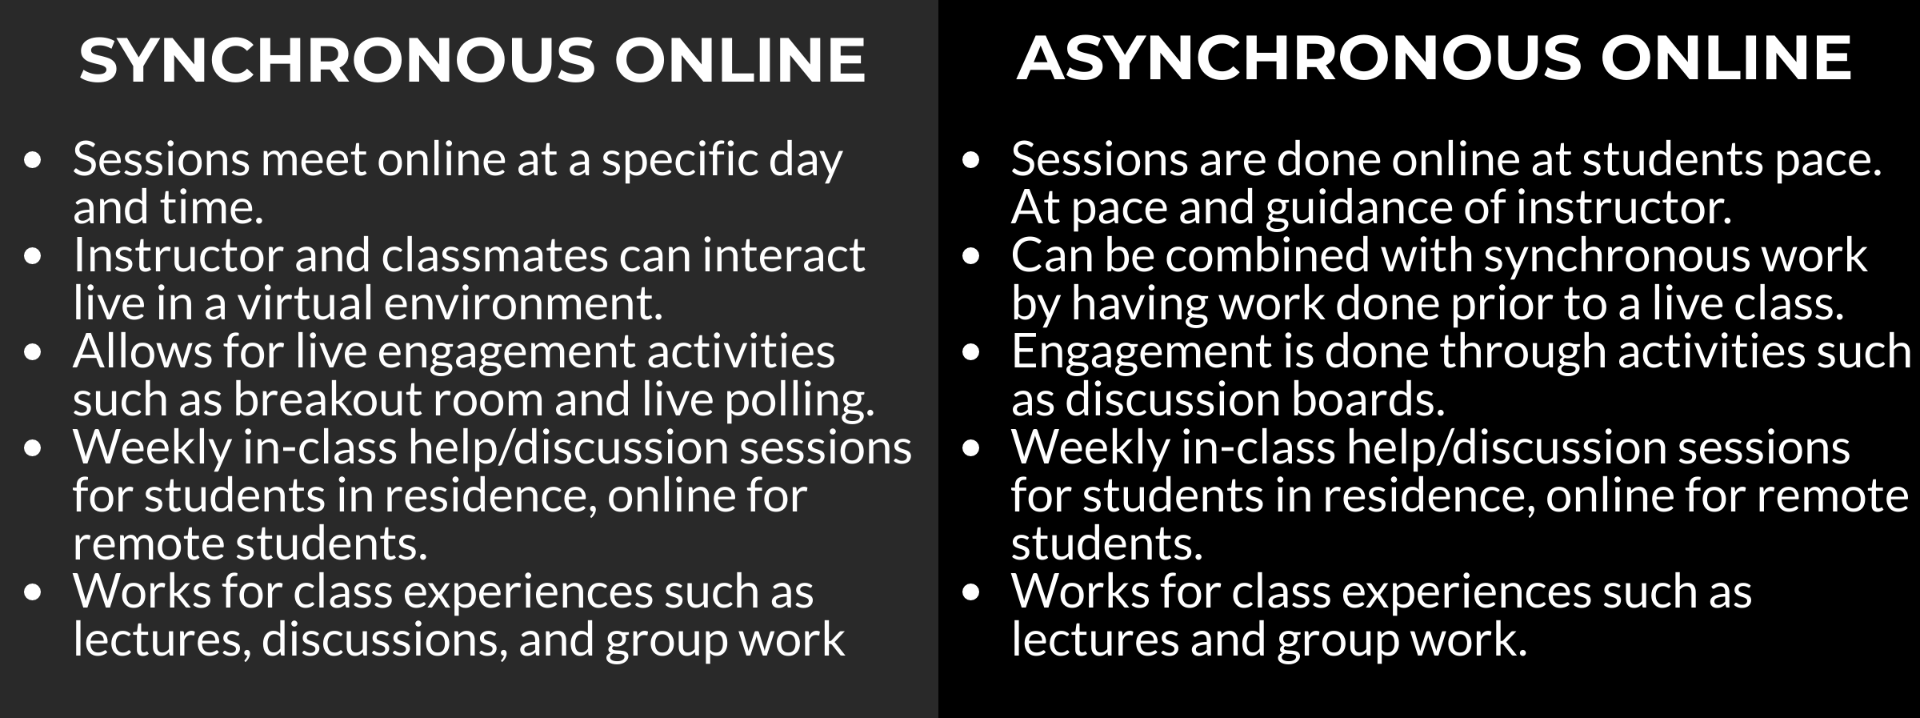 describes synchonous and asychronous online teaching styles